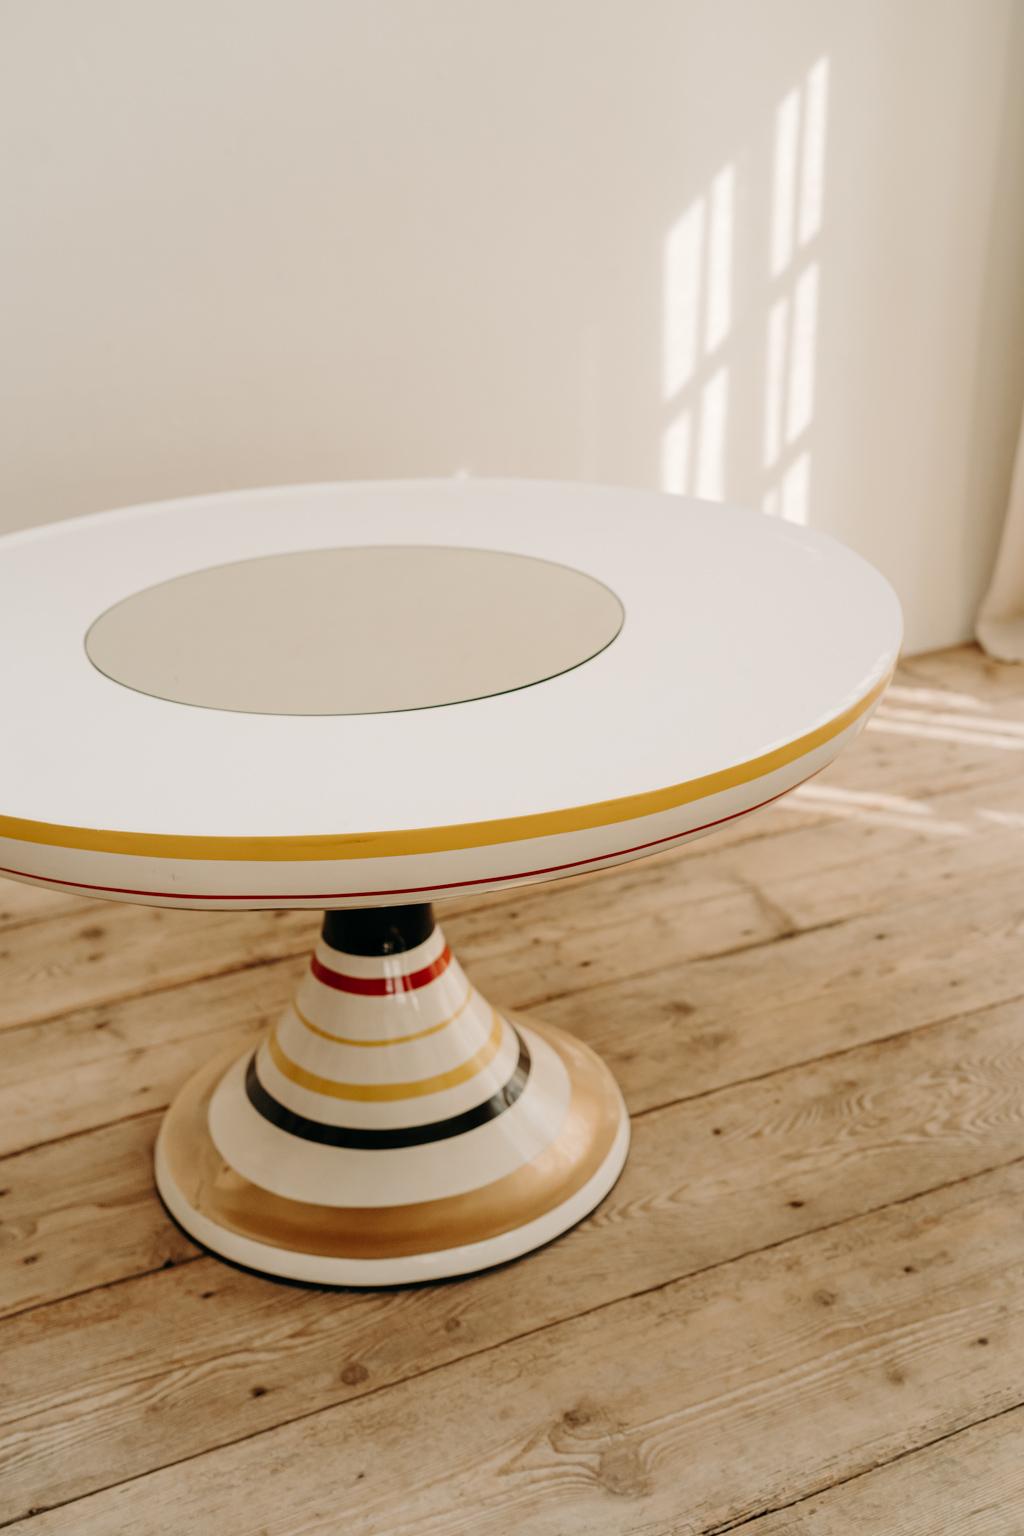 Hand-Painted Colorful Round Pedestal Table by Valentina Audrito